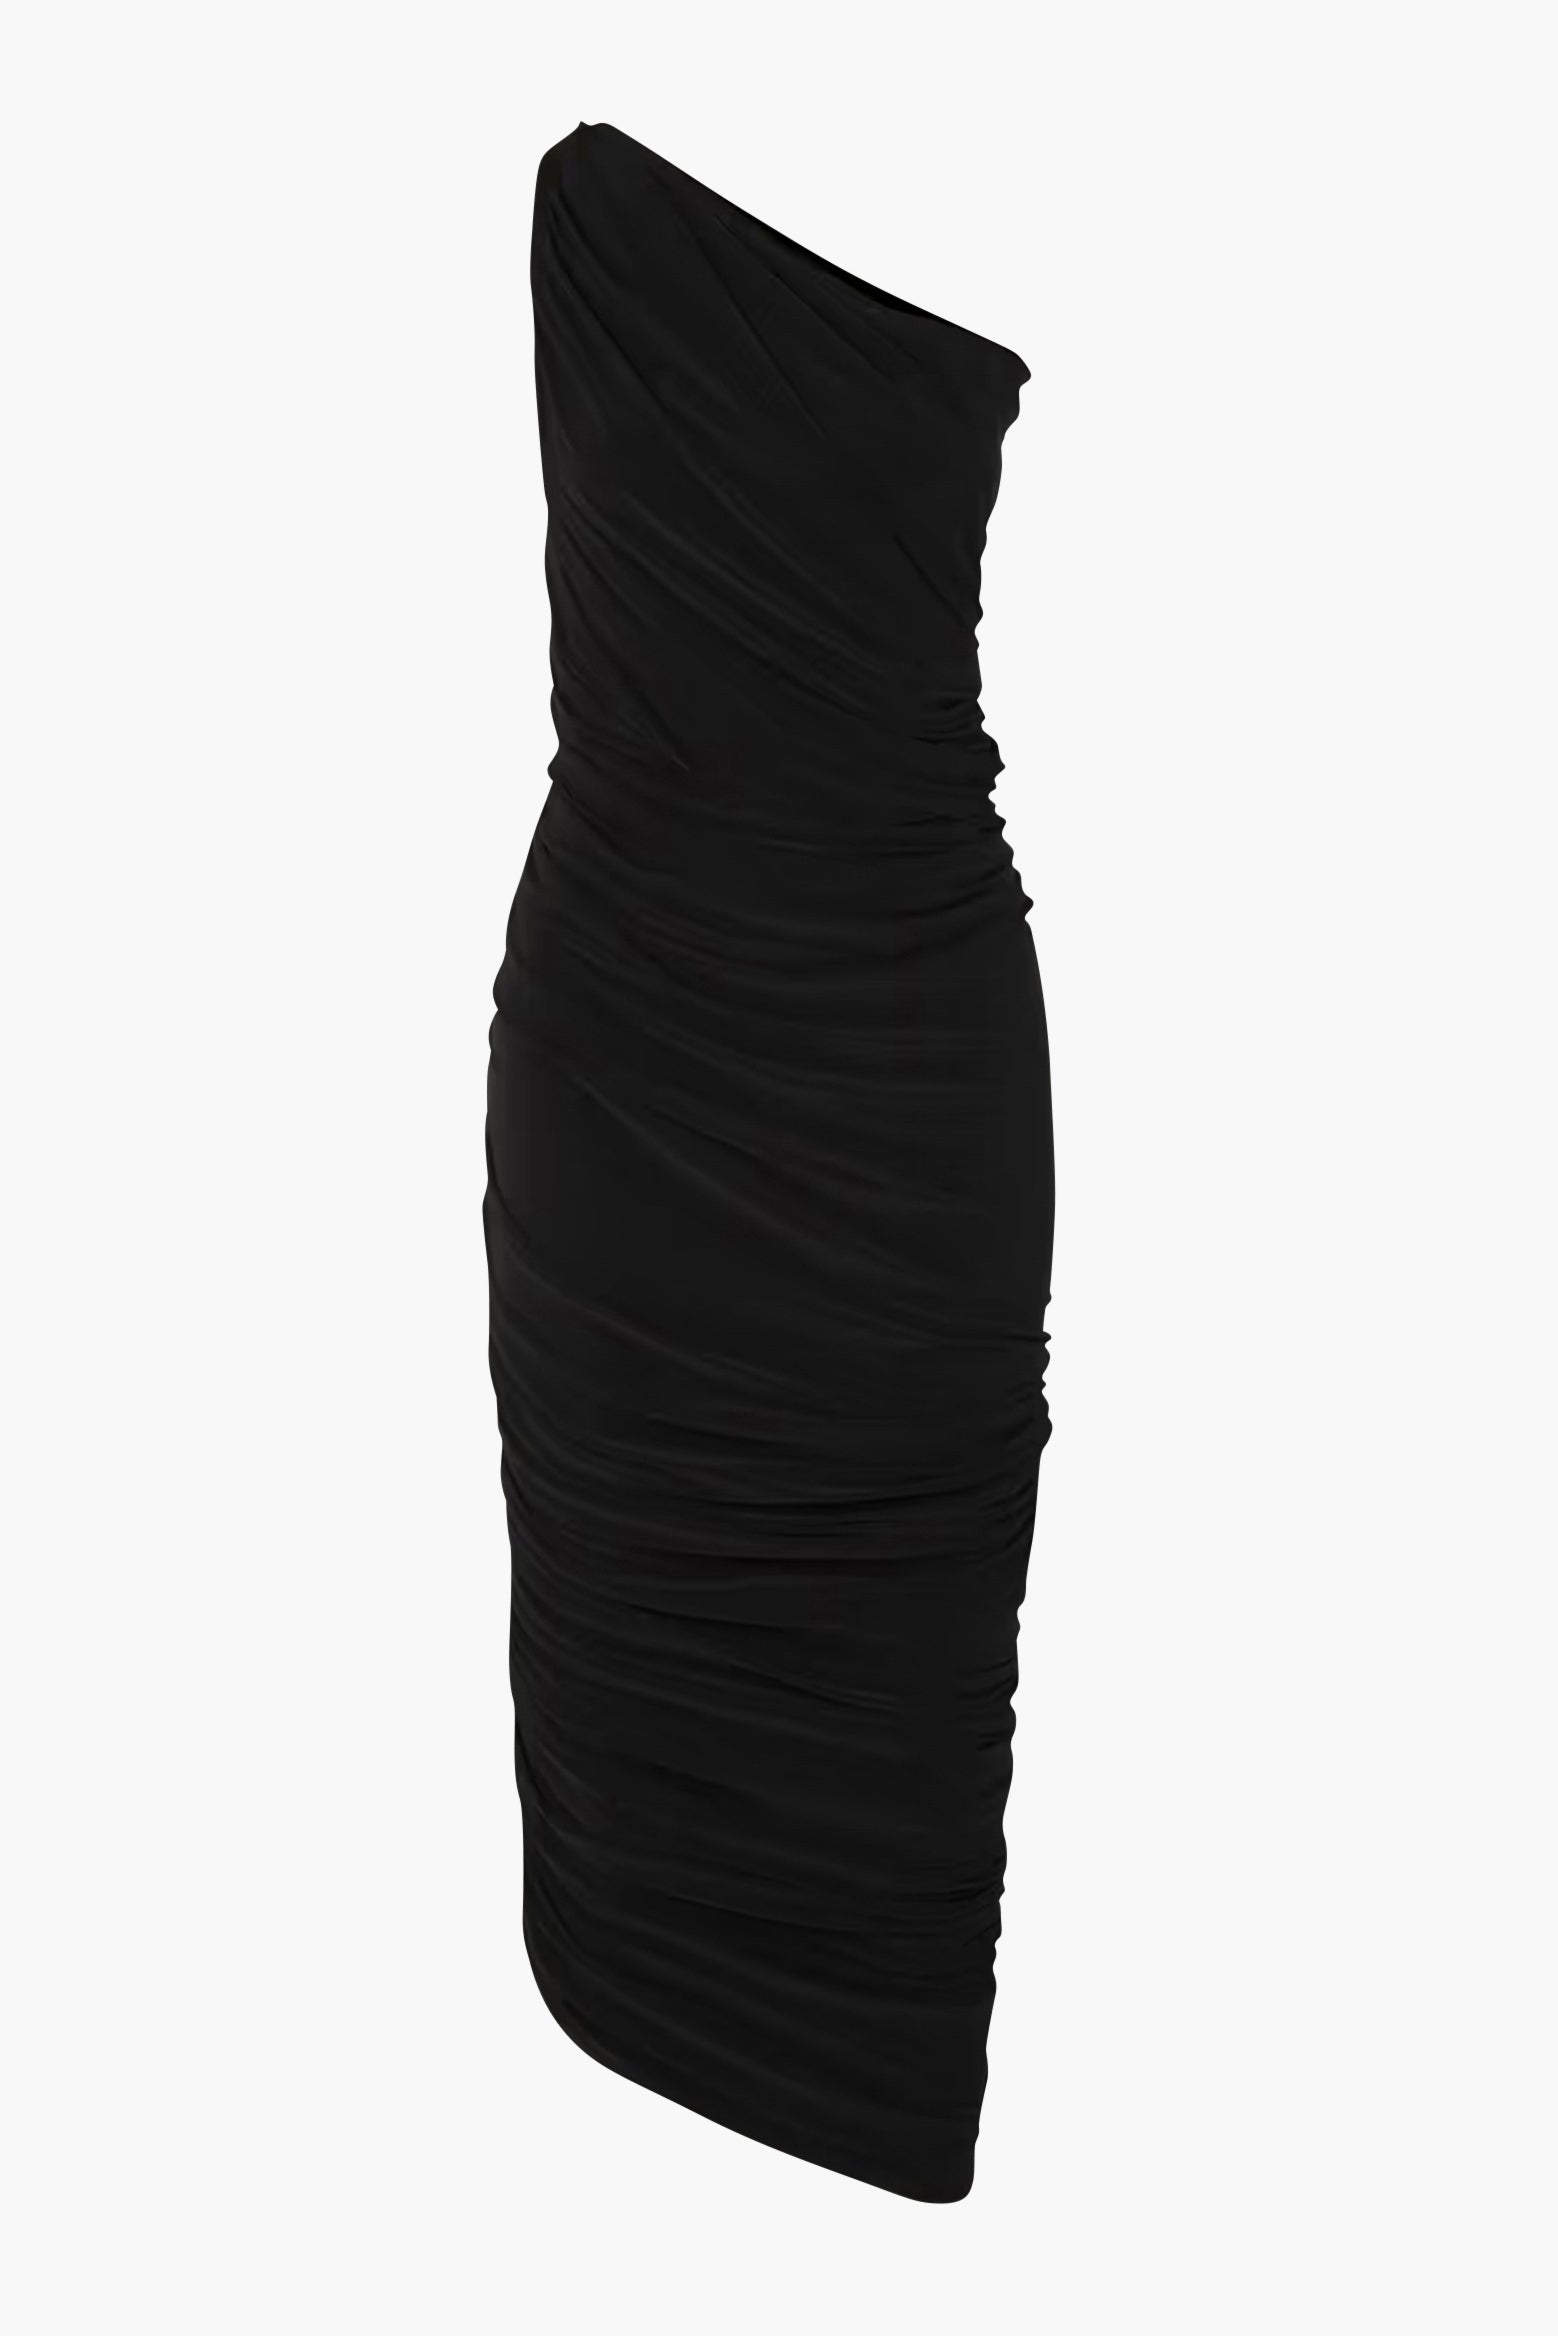 Norma Kamali Diana Gown in Black available at TNT The New Trend Australia.